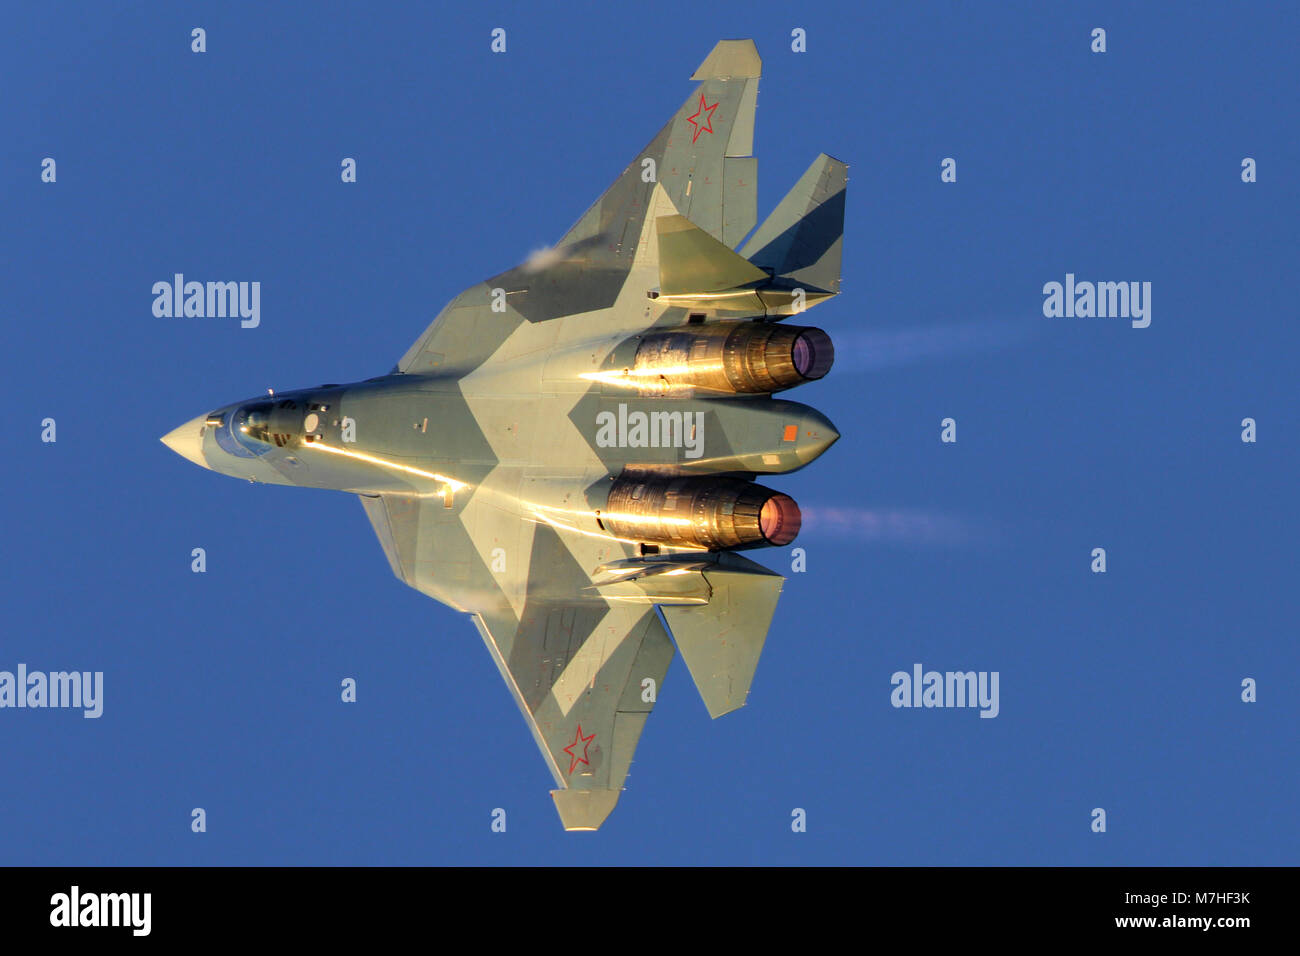 T-50 PAK-FA fifth generation jet fighter of the Russian Air Force. Stock Photo